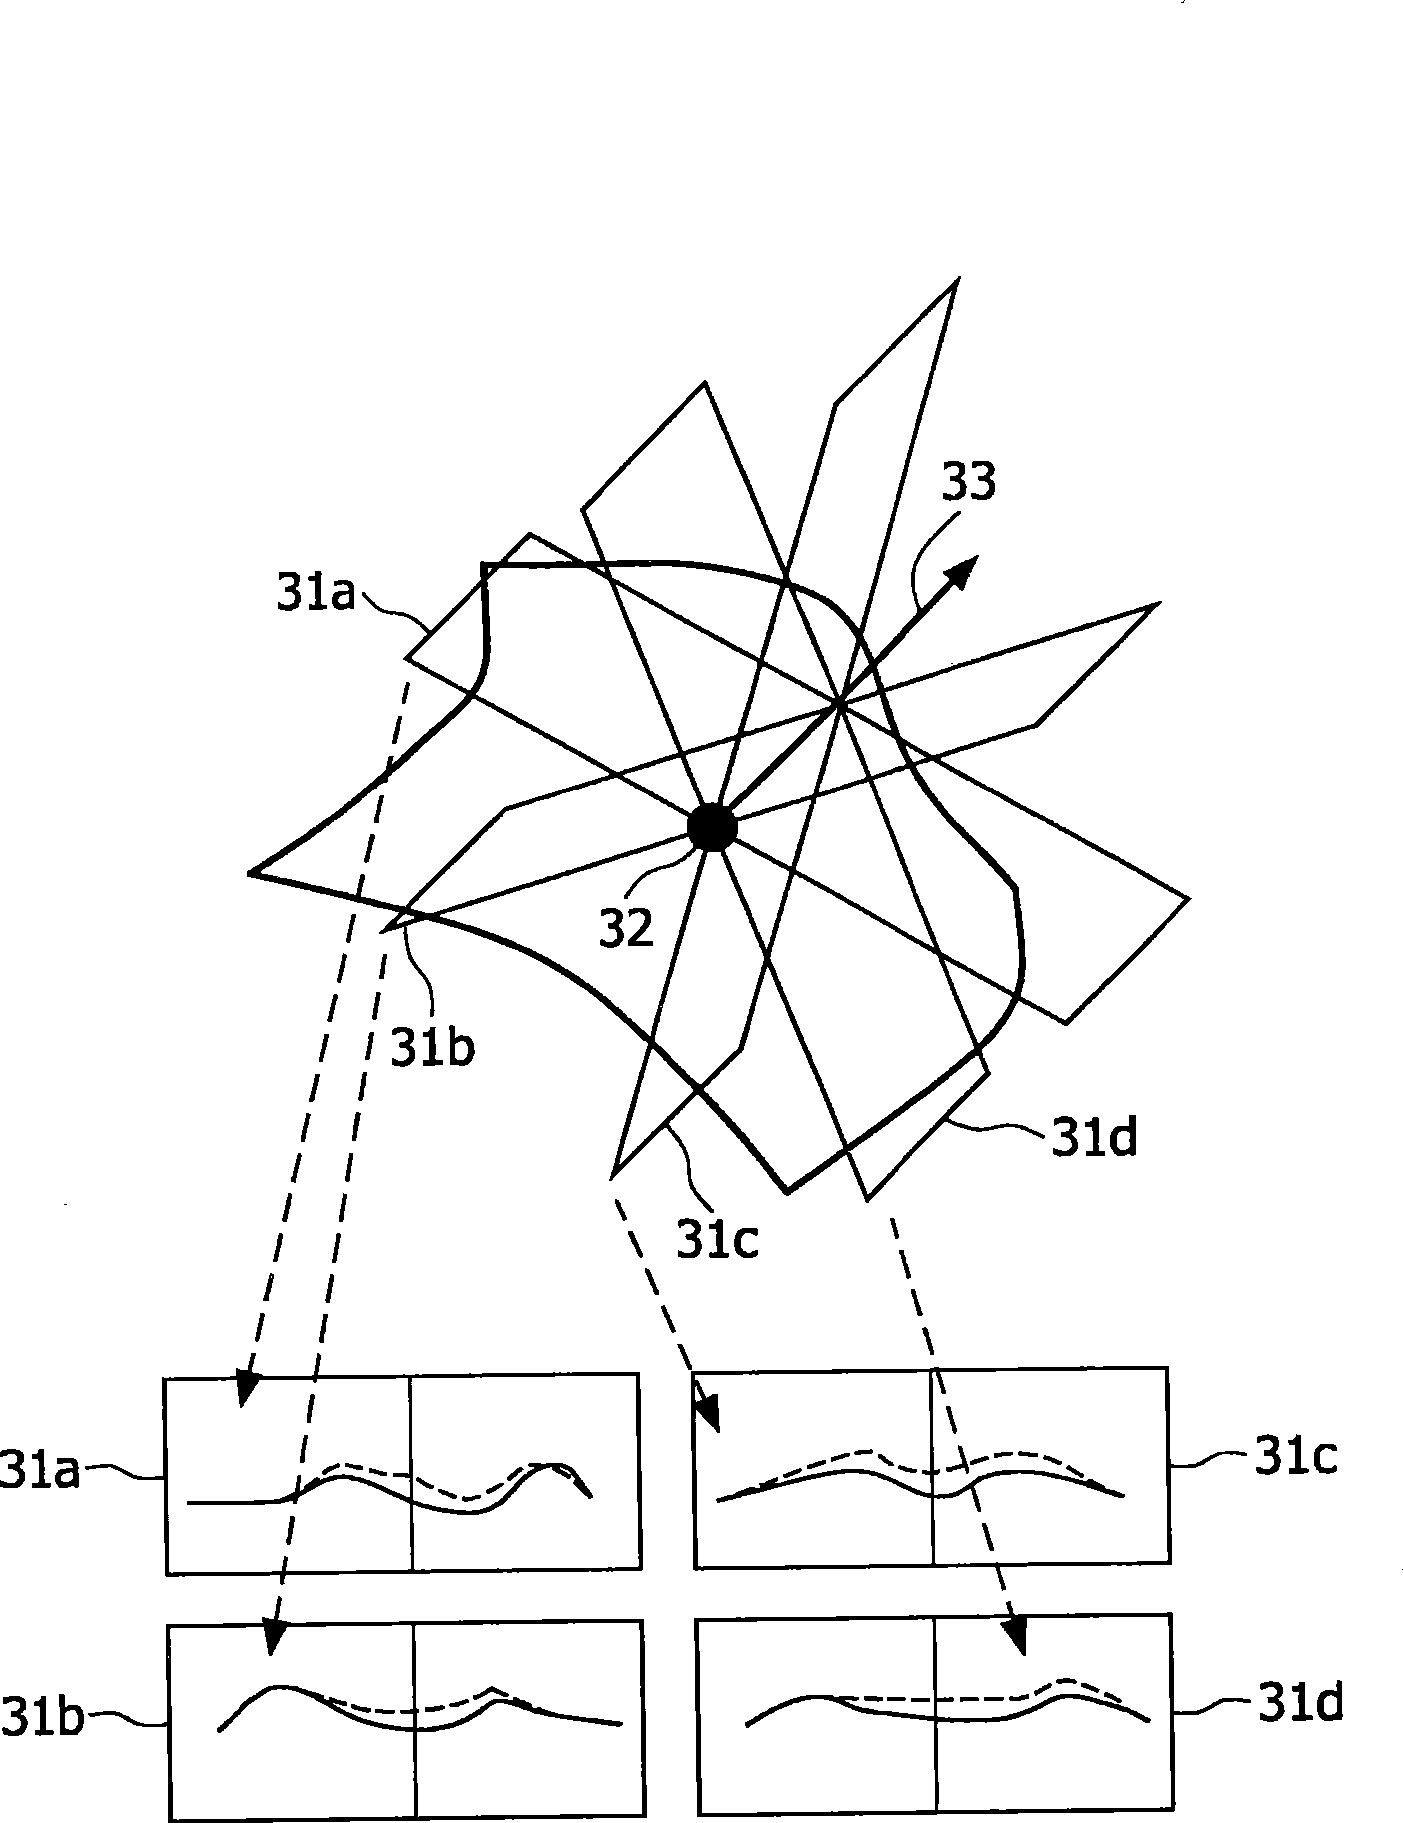 A method, apparatus, system and computer-readable medium for interactive shape manipulation